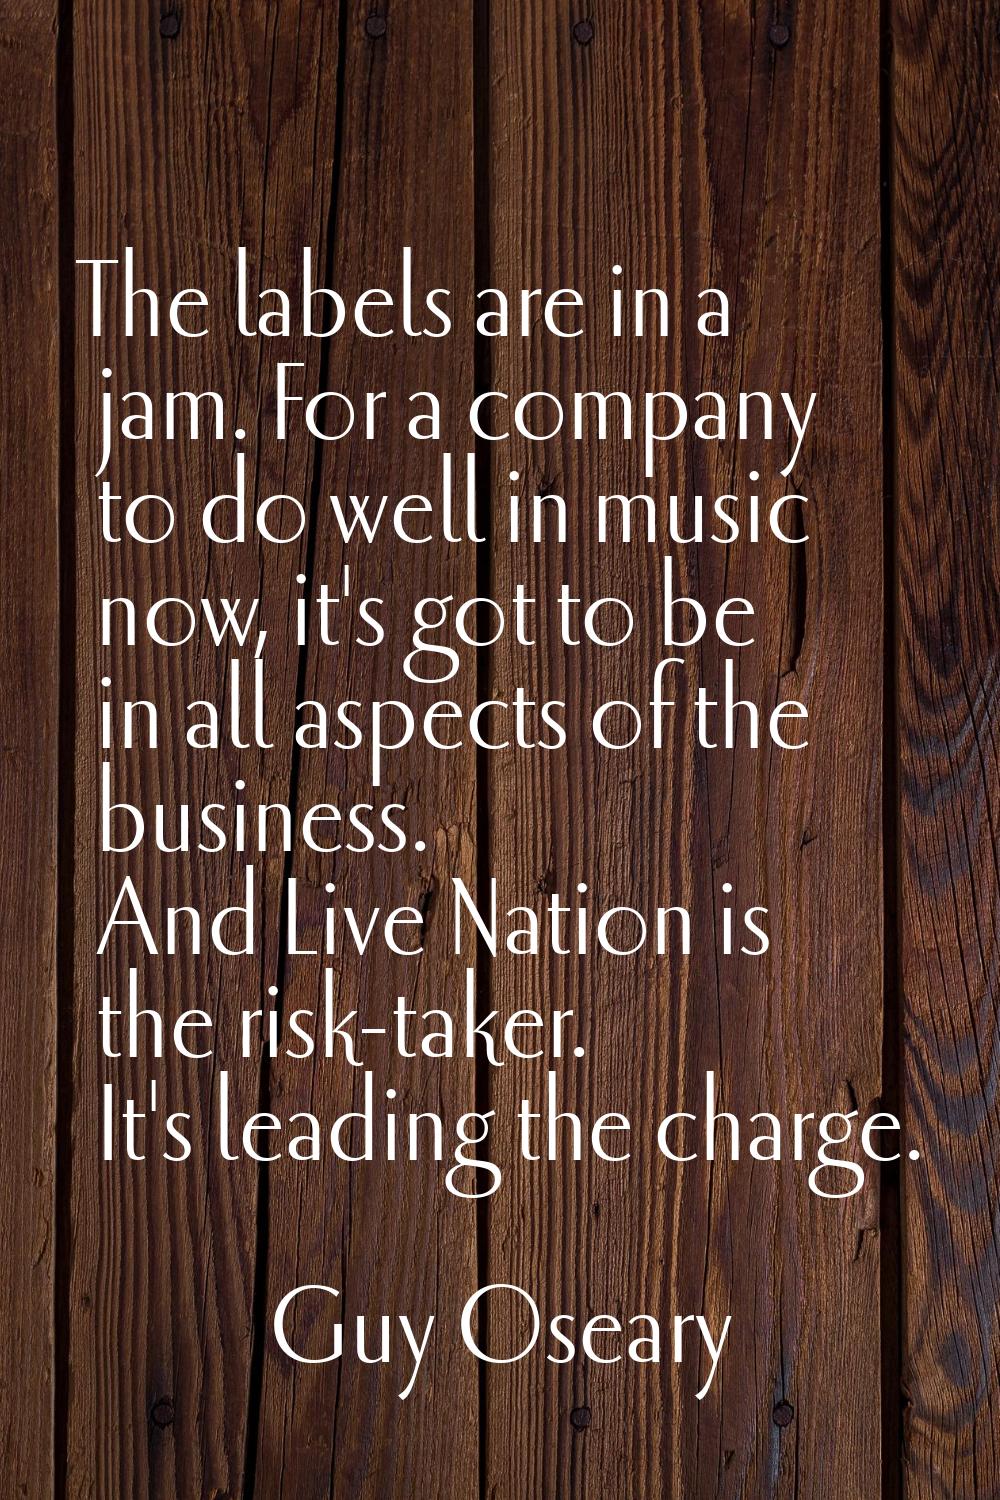 The labels are in a jam. For a company to do well in music now, it's got to be in all aspects of th